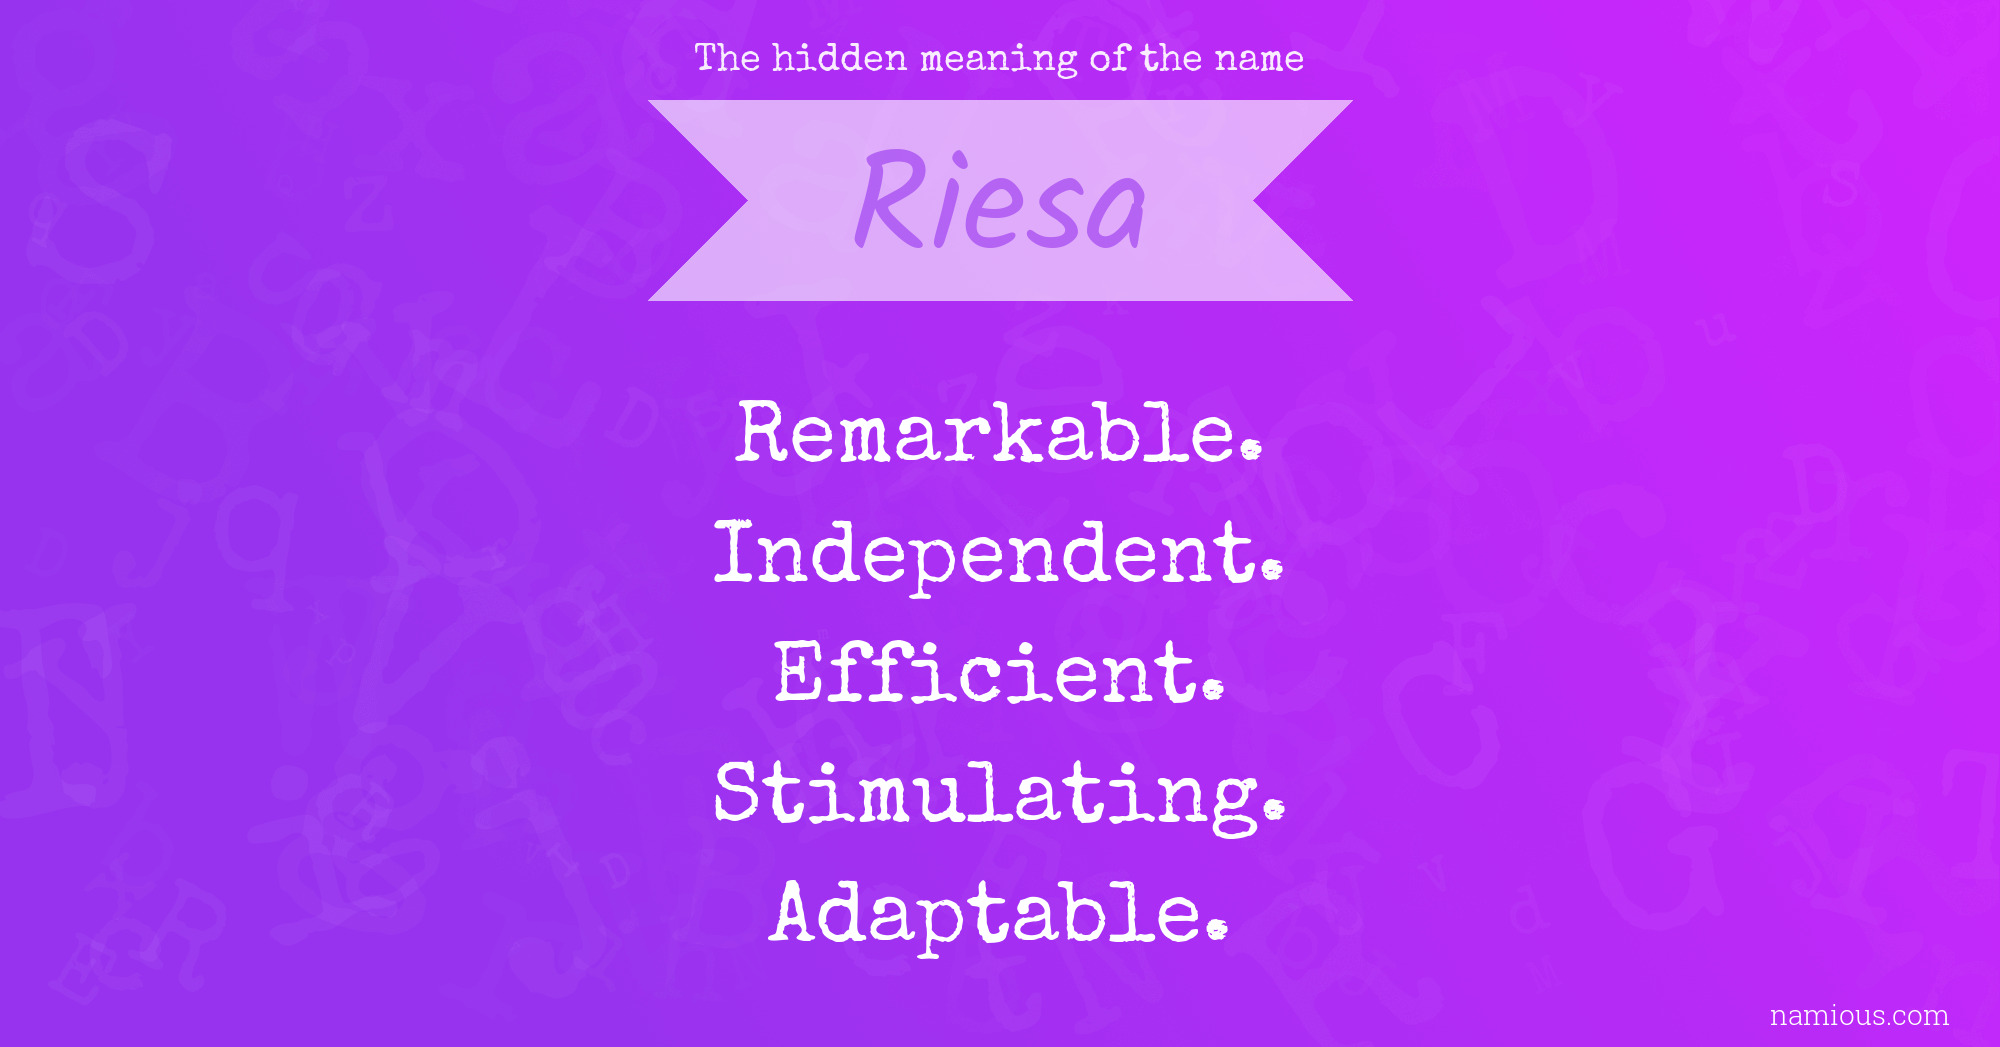 The hidden meaning of the name Riesa